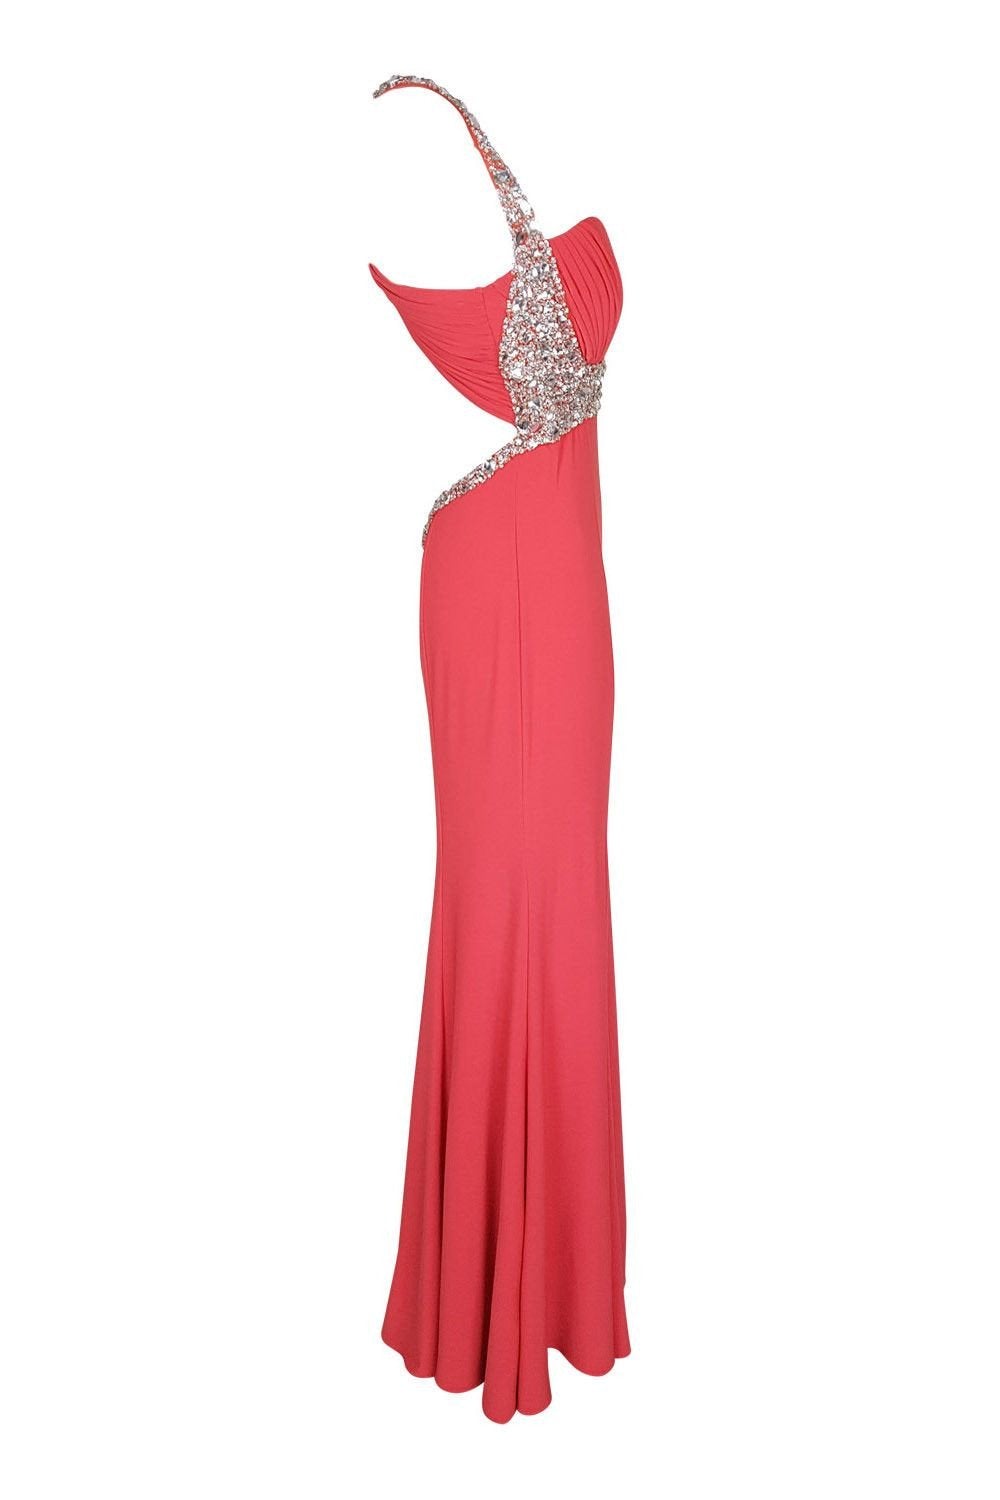 PROM FROCKS Pink Backless Prom Gown (10)-Prom Frocks-The Freperie